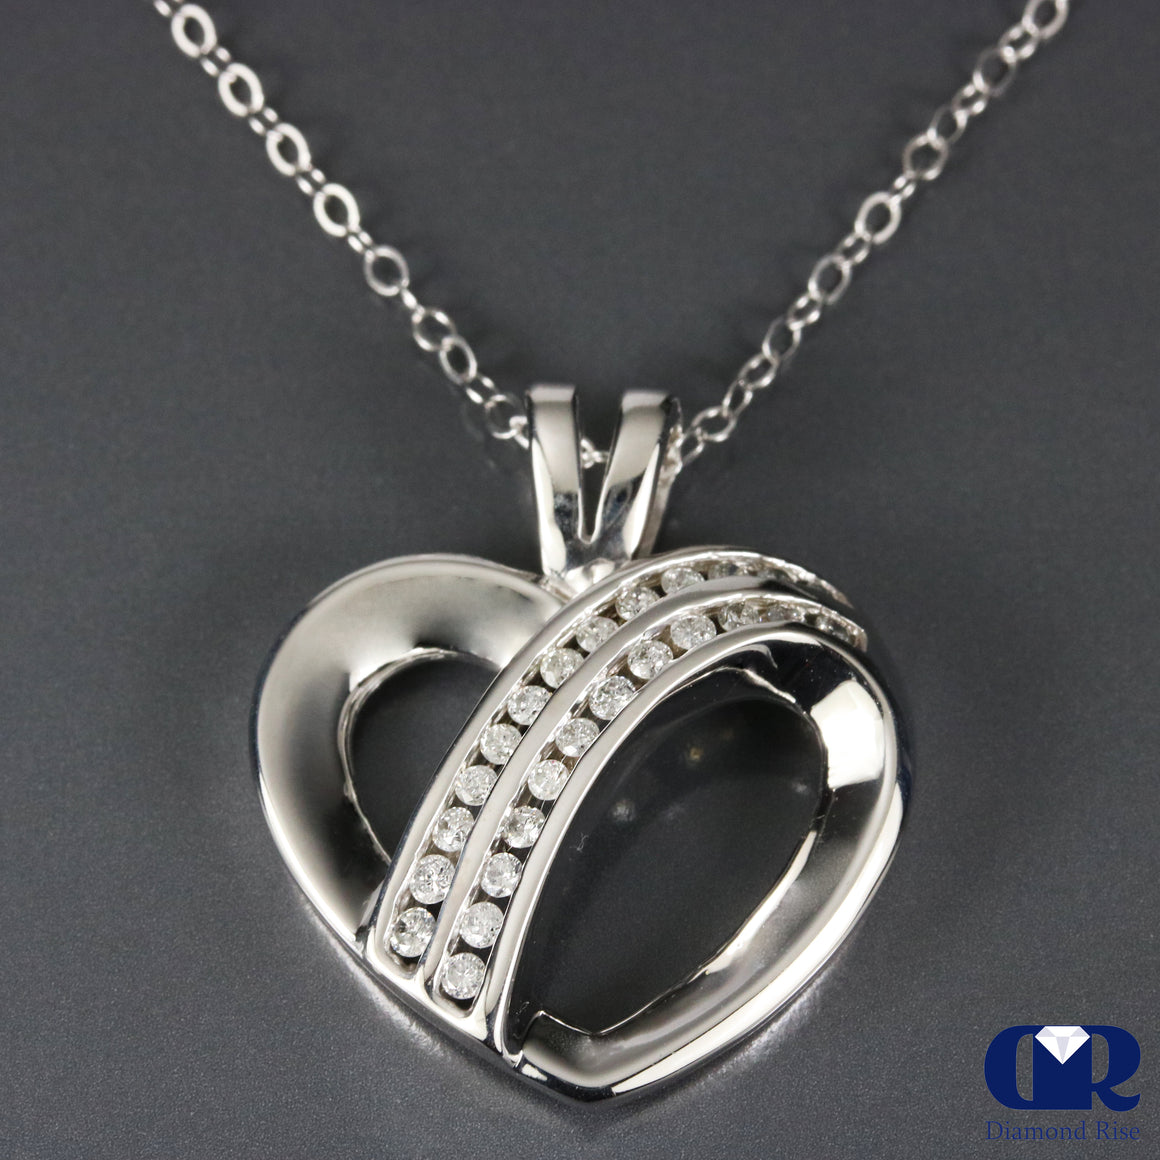 Round Diamond double Row Pendant Necklace 14K White Gold With 16" Chain